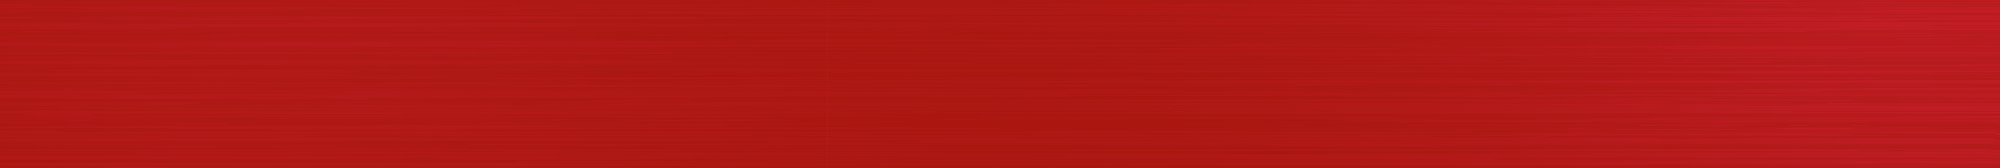 Red Metal Background Image